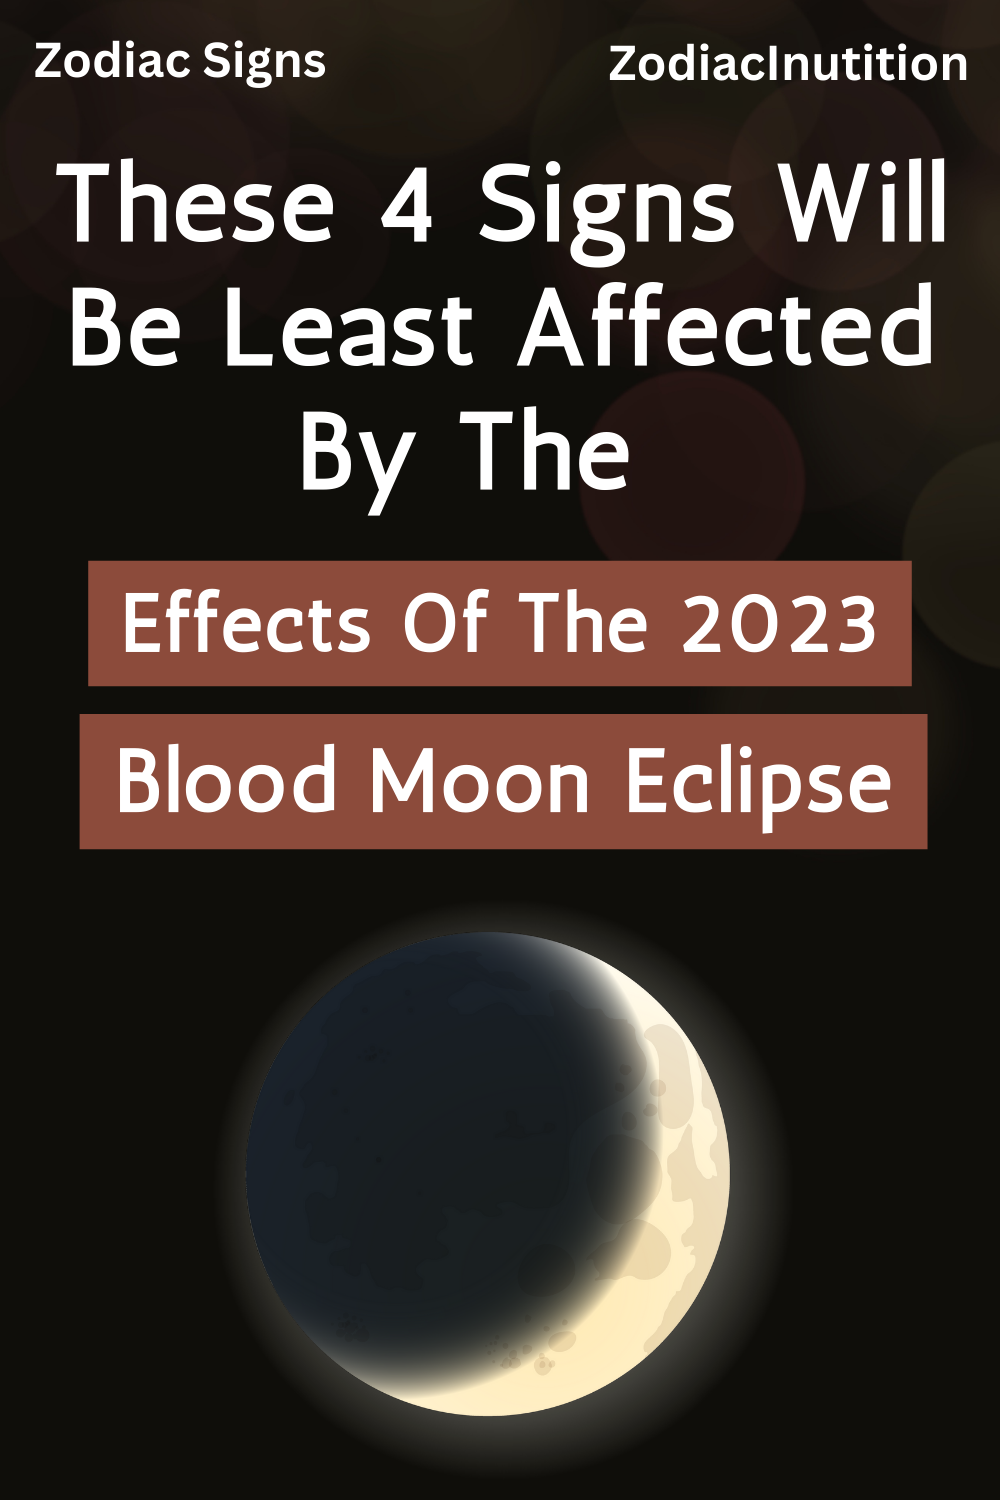 These 4 Signs Will Be Least Affected By The Effects Of The 2023 Blood Moon Eclipse